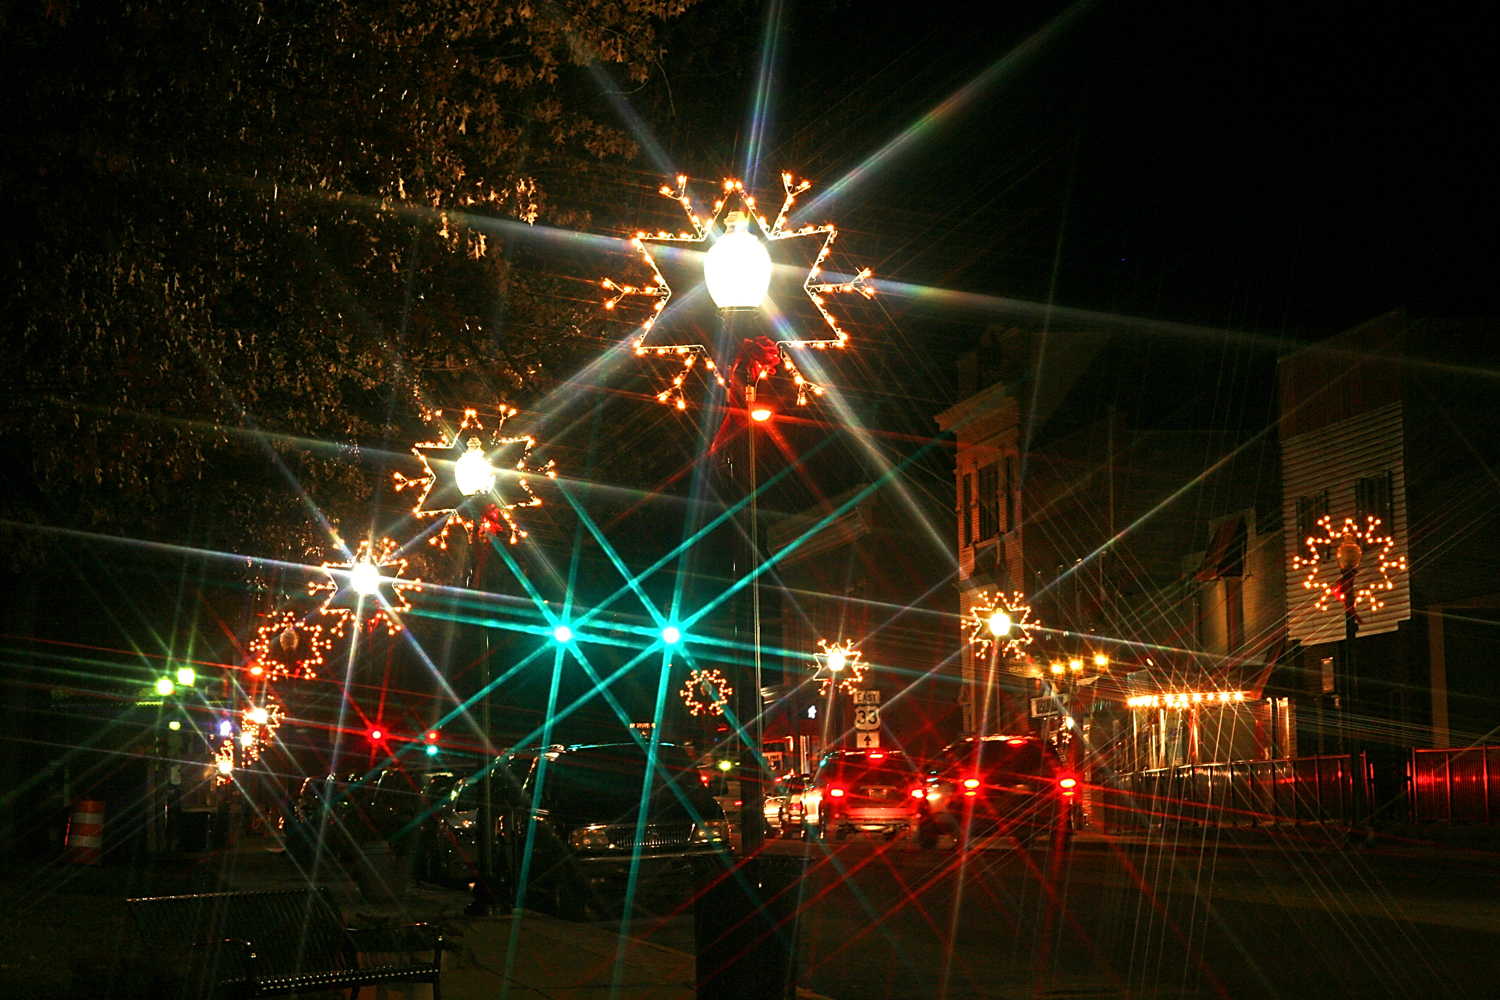 Ripley, West Virginia, decks the streets with holiday cheer.